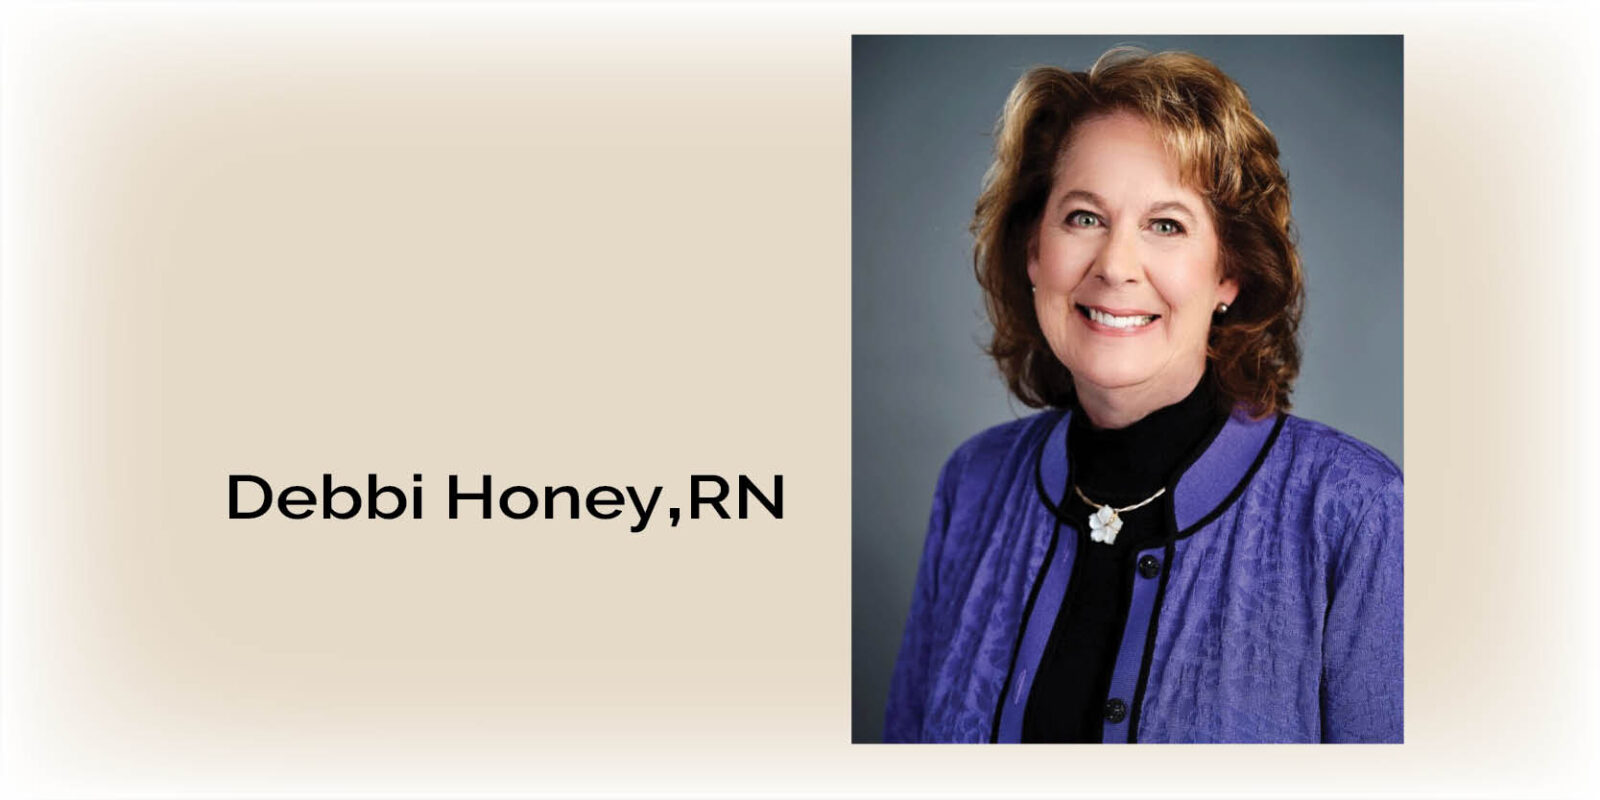 Debbi Honey of Covenant Health is Recognized as Patient Safety Expert